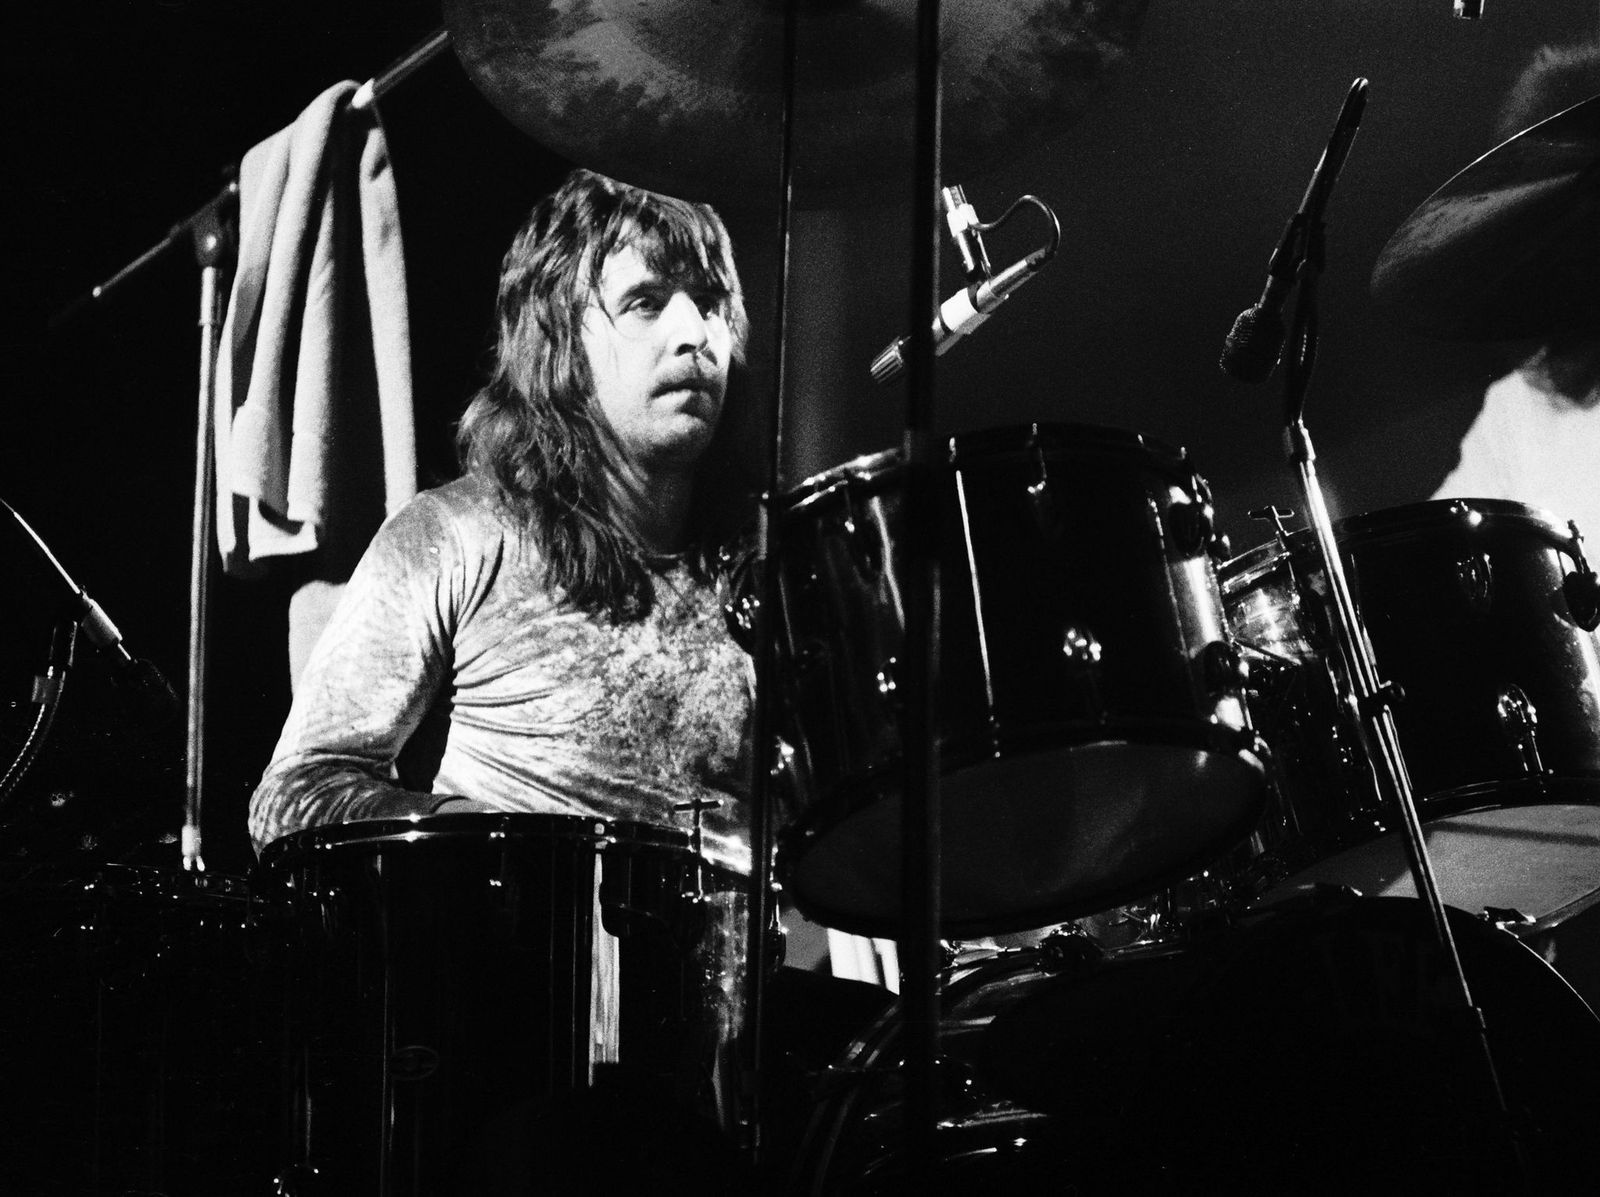 Lee Kerslake from Uriah Heep performs live on stage in Amsterdam, Netherlands on January 1, 1974 | Photo: Gijsbert Hanekroot/Redferns/Getty Images